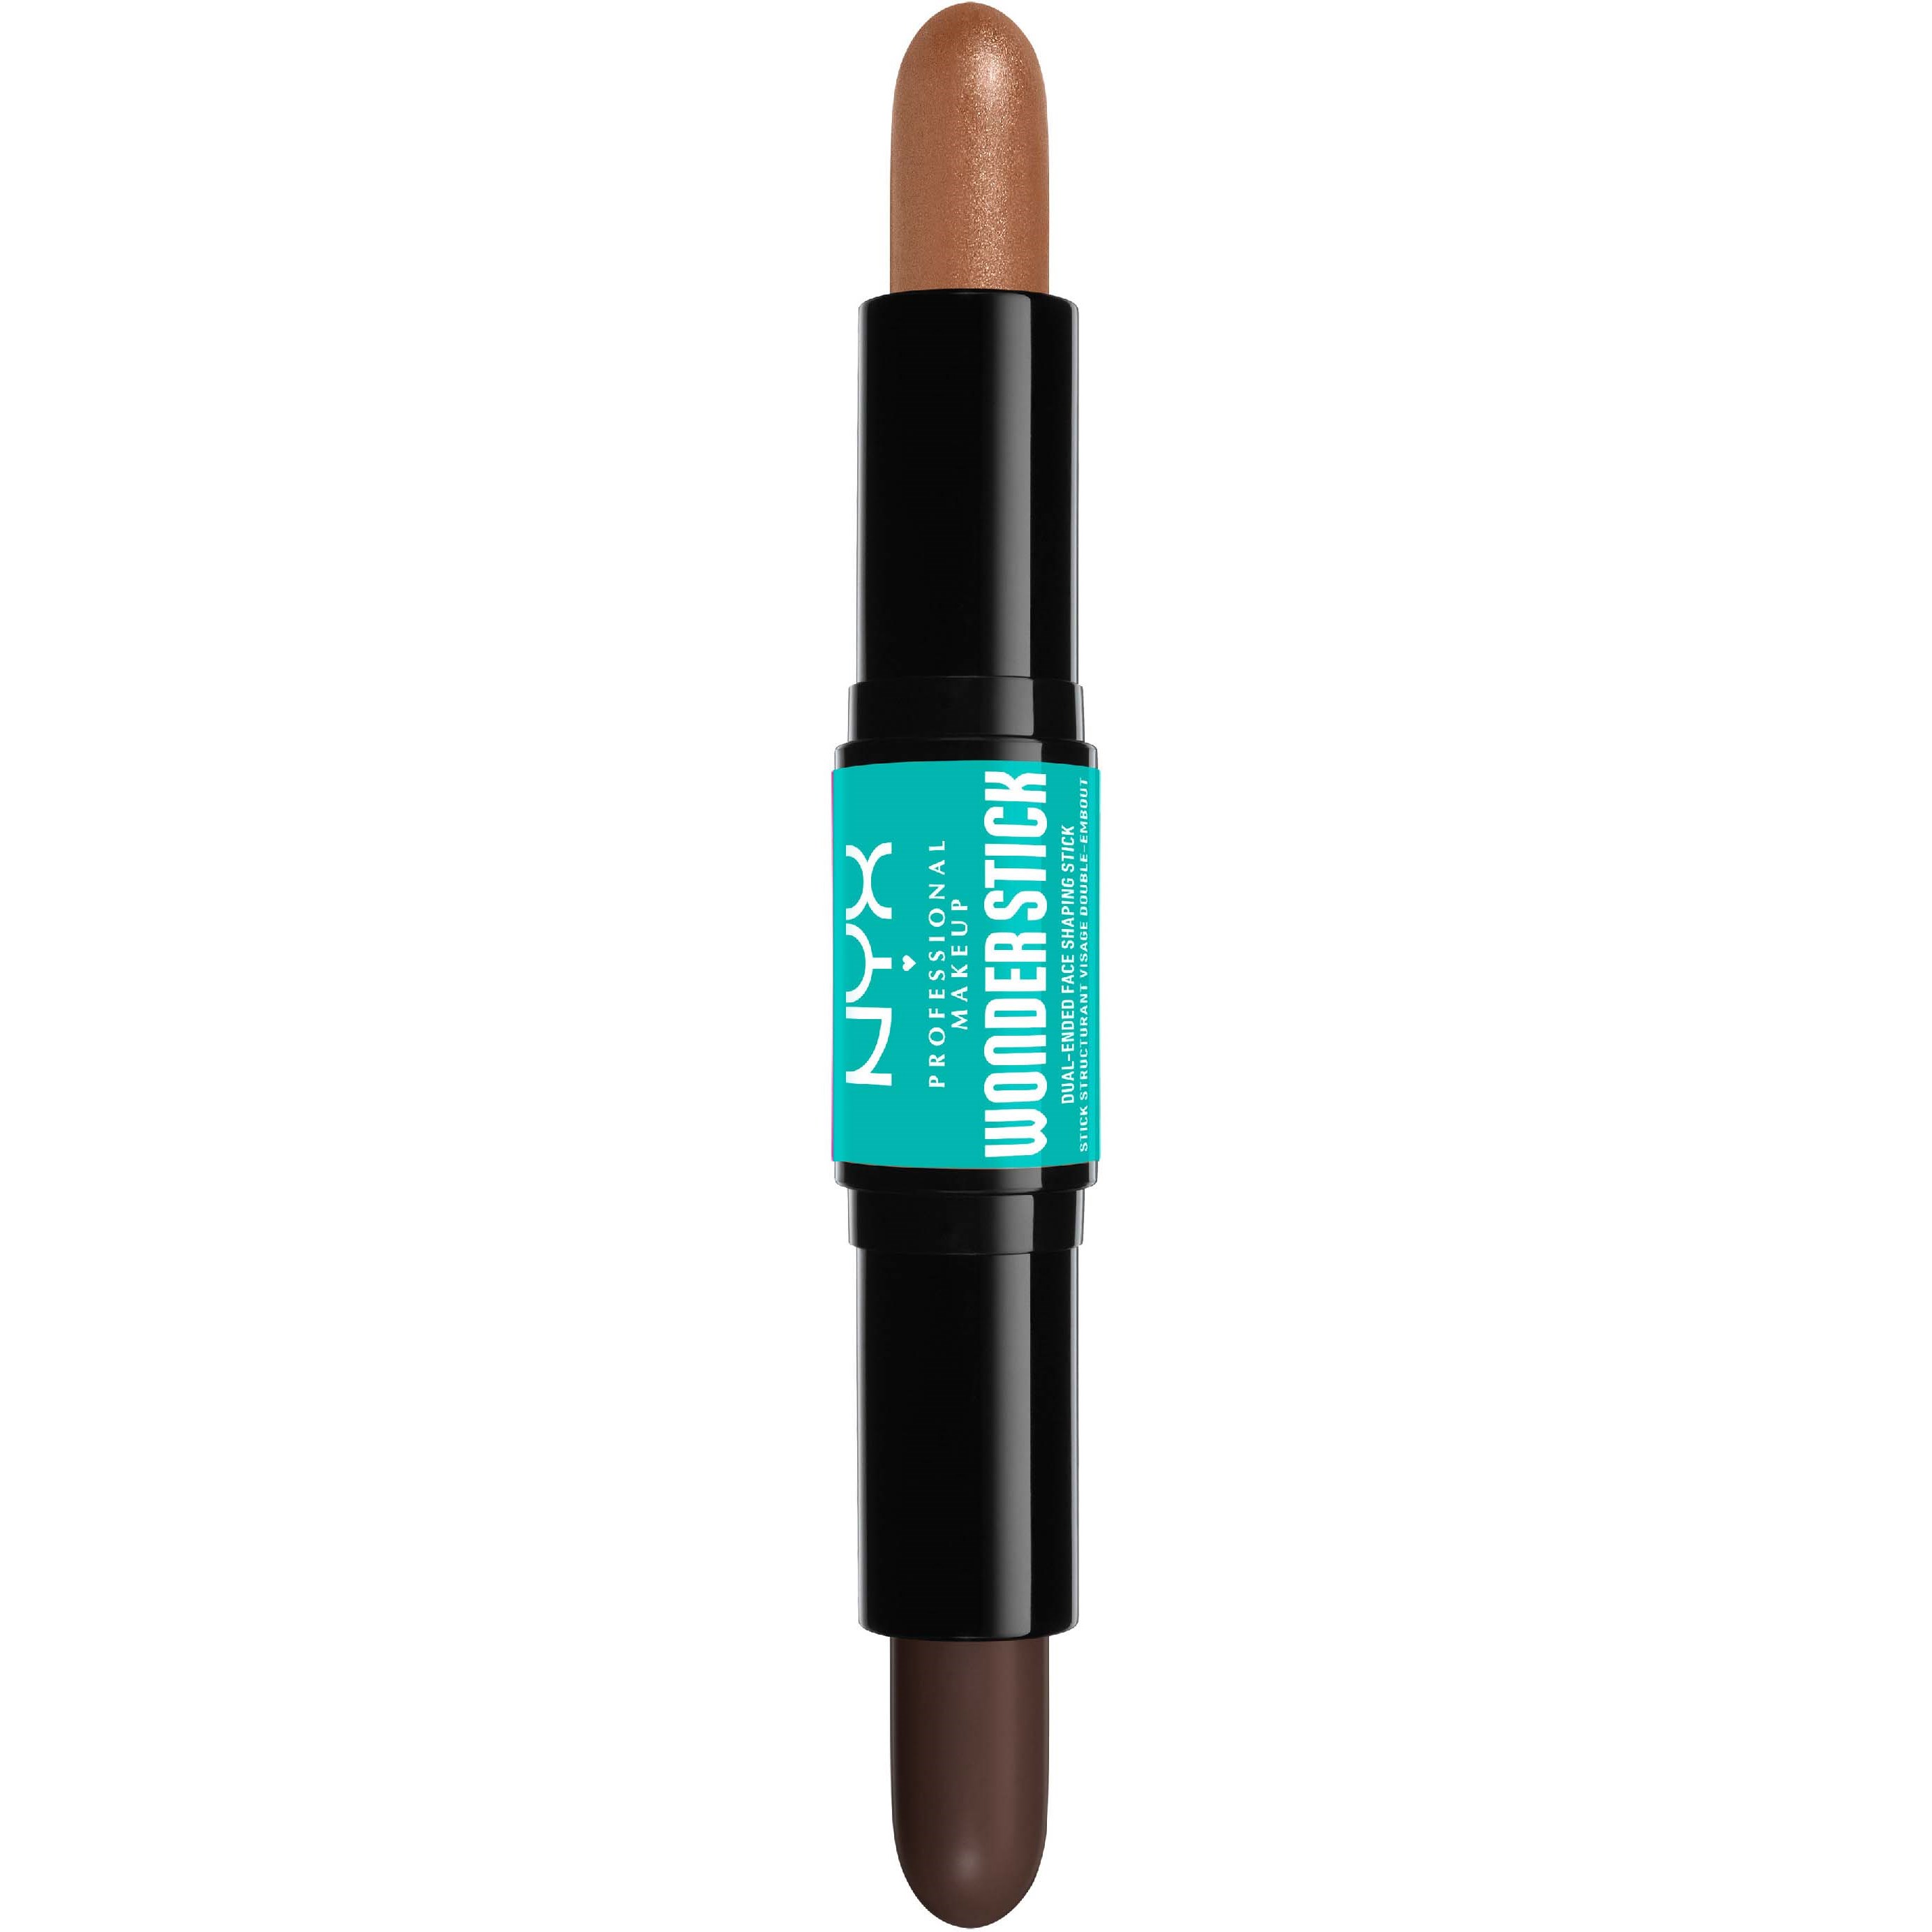 Läs mer om NYX PROFESSIONAL MAKEUP Wonder Stick Dual-Ended Face Shaping Stick 07